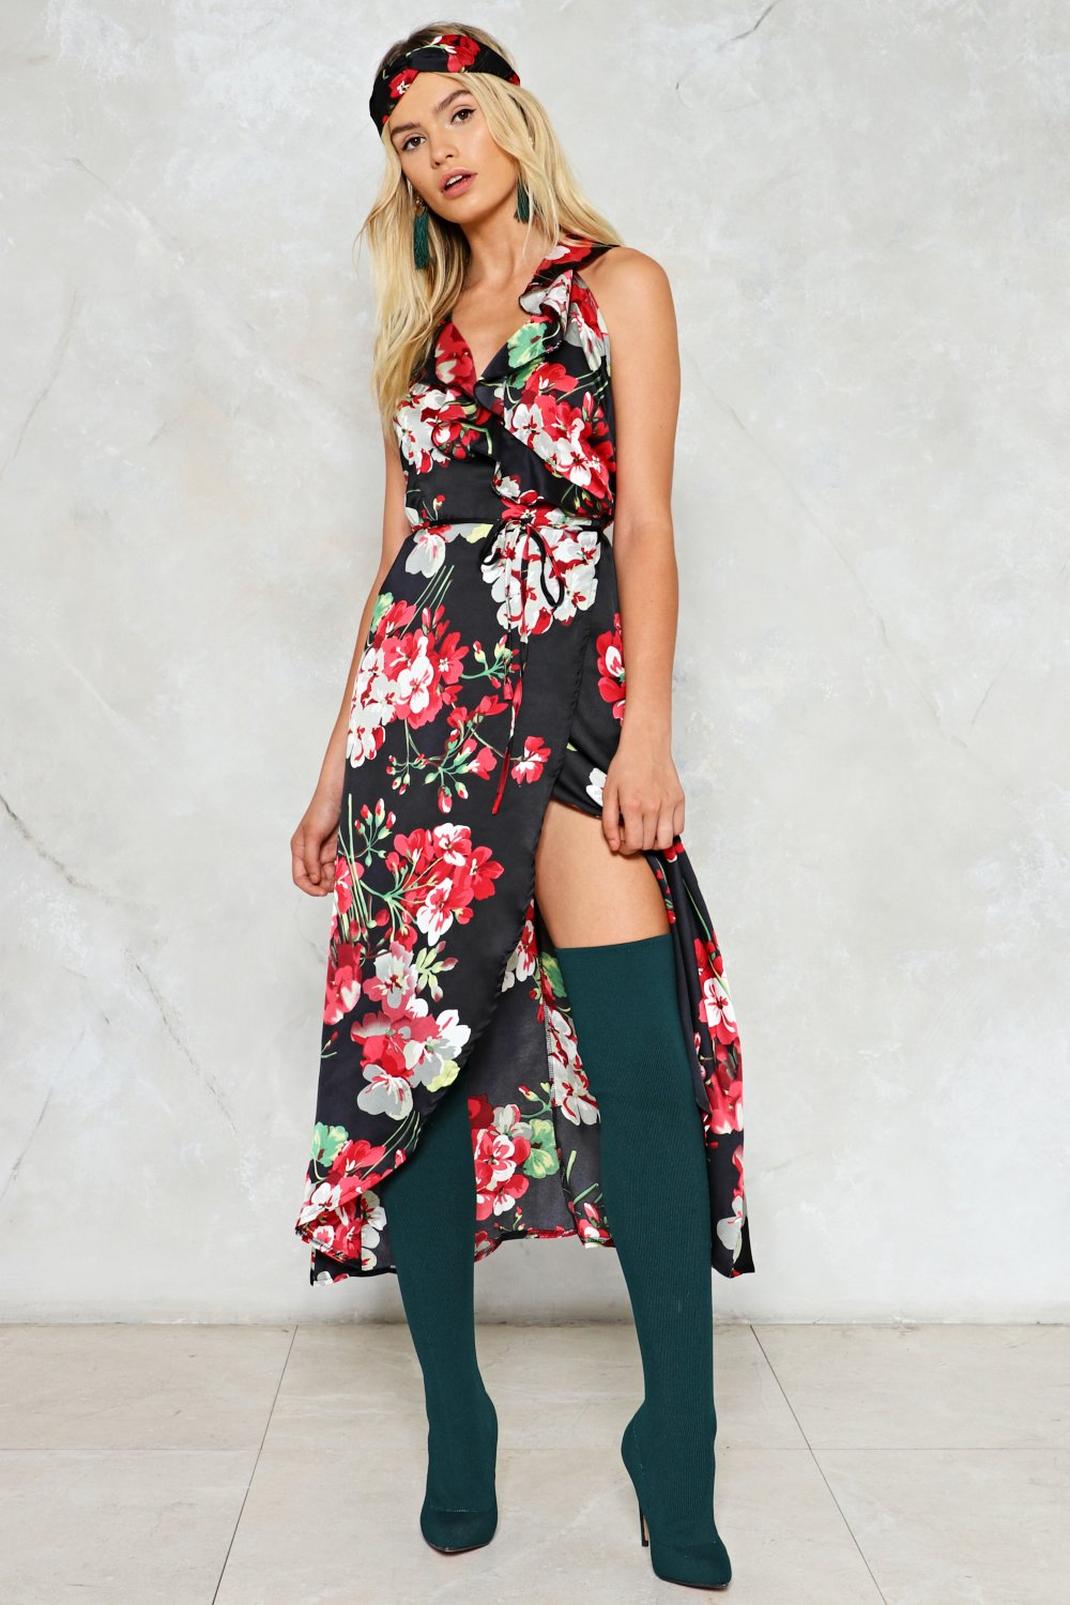 If Only Tonight We Could Sleep Floral Dress image number 1